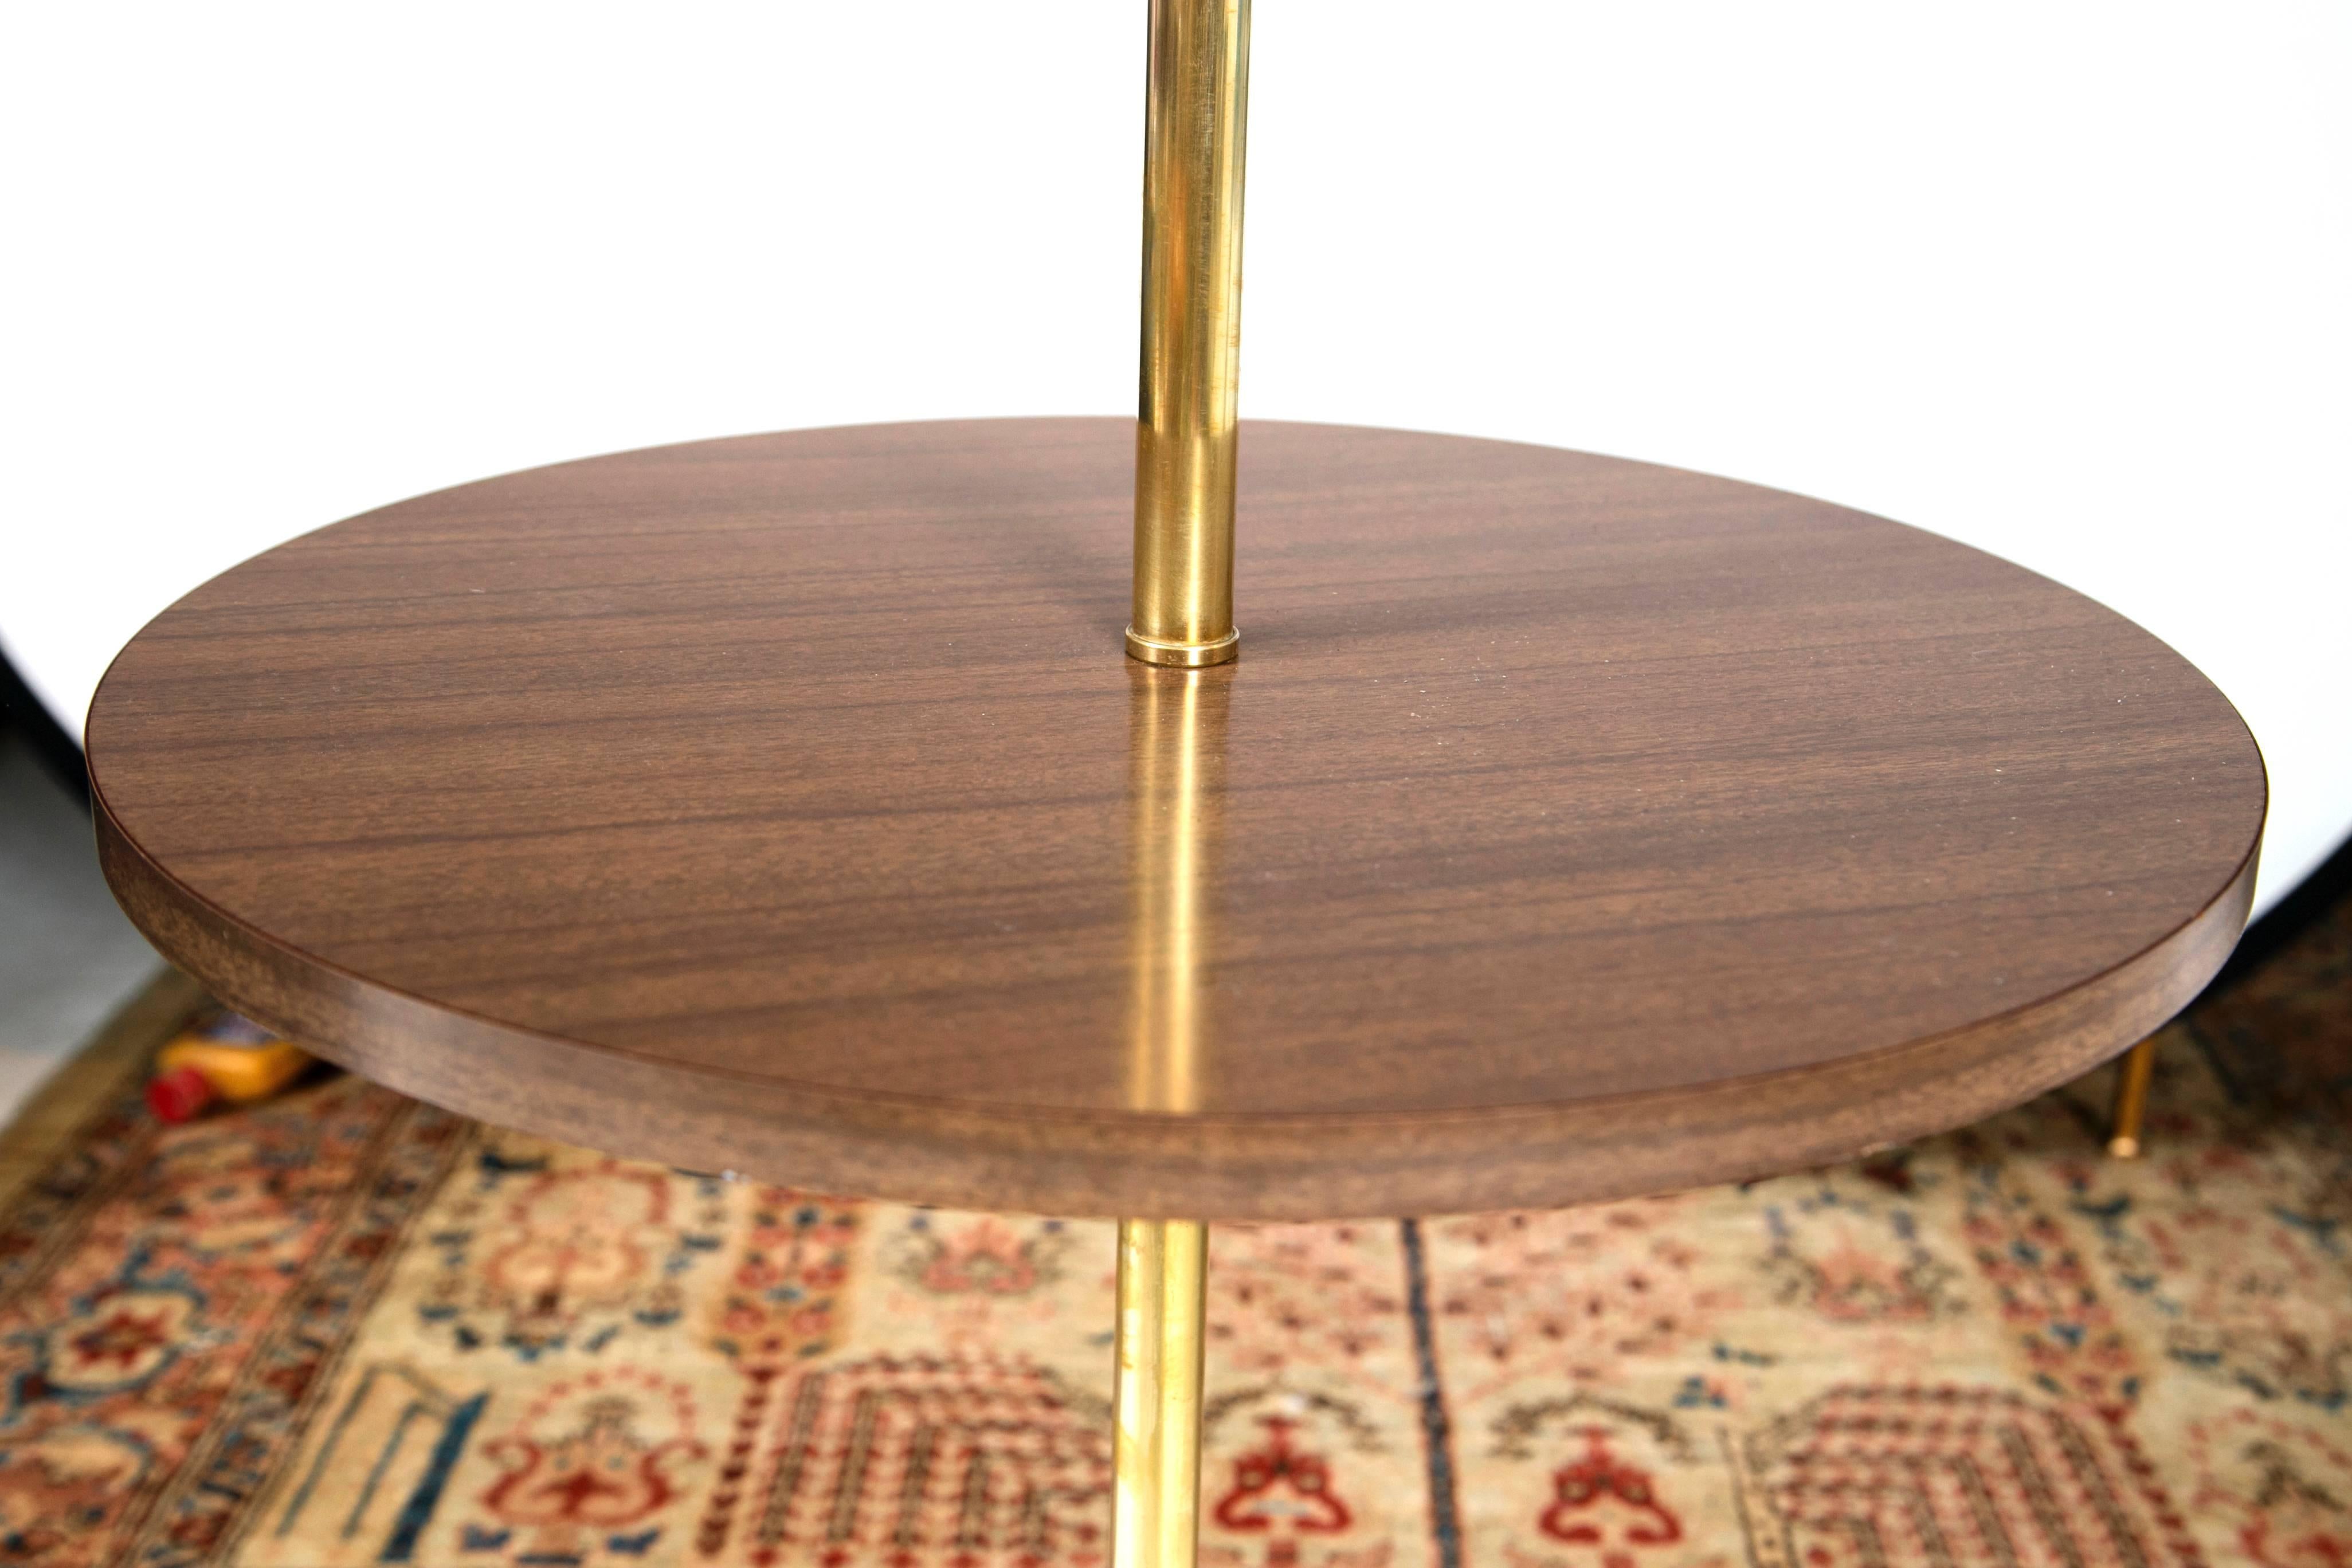 The epitome of the Mid-Century. This well proportioned brass core lamp stands upon a tri-leg base that rises up to a circular formica accent table. Perfect to nestle between two club chairs or flanking a classic lounge chair. Looks brand new, great